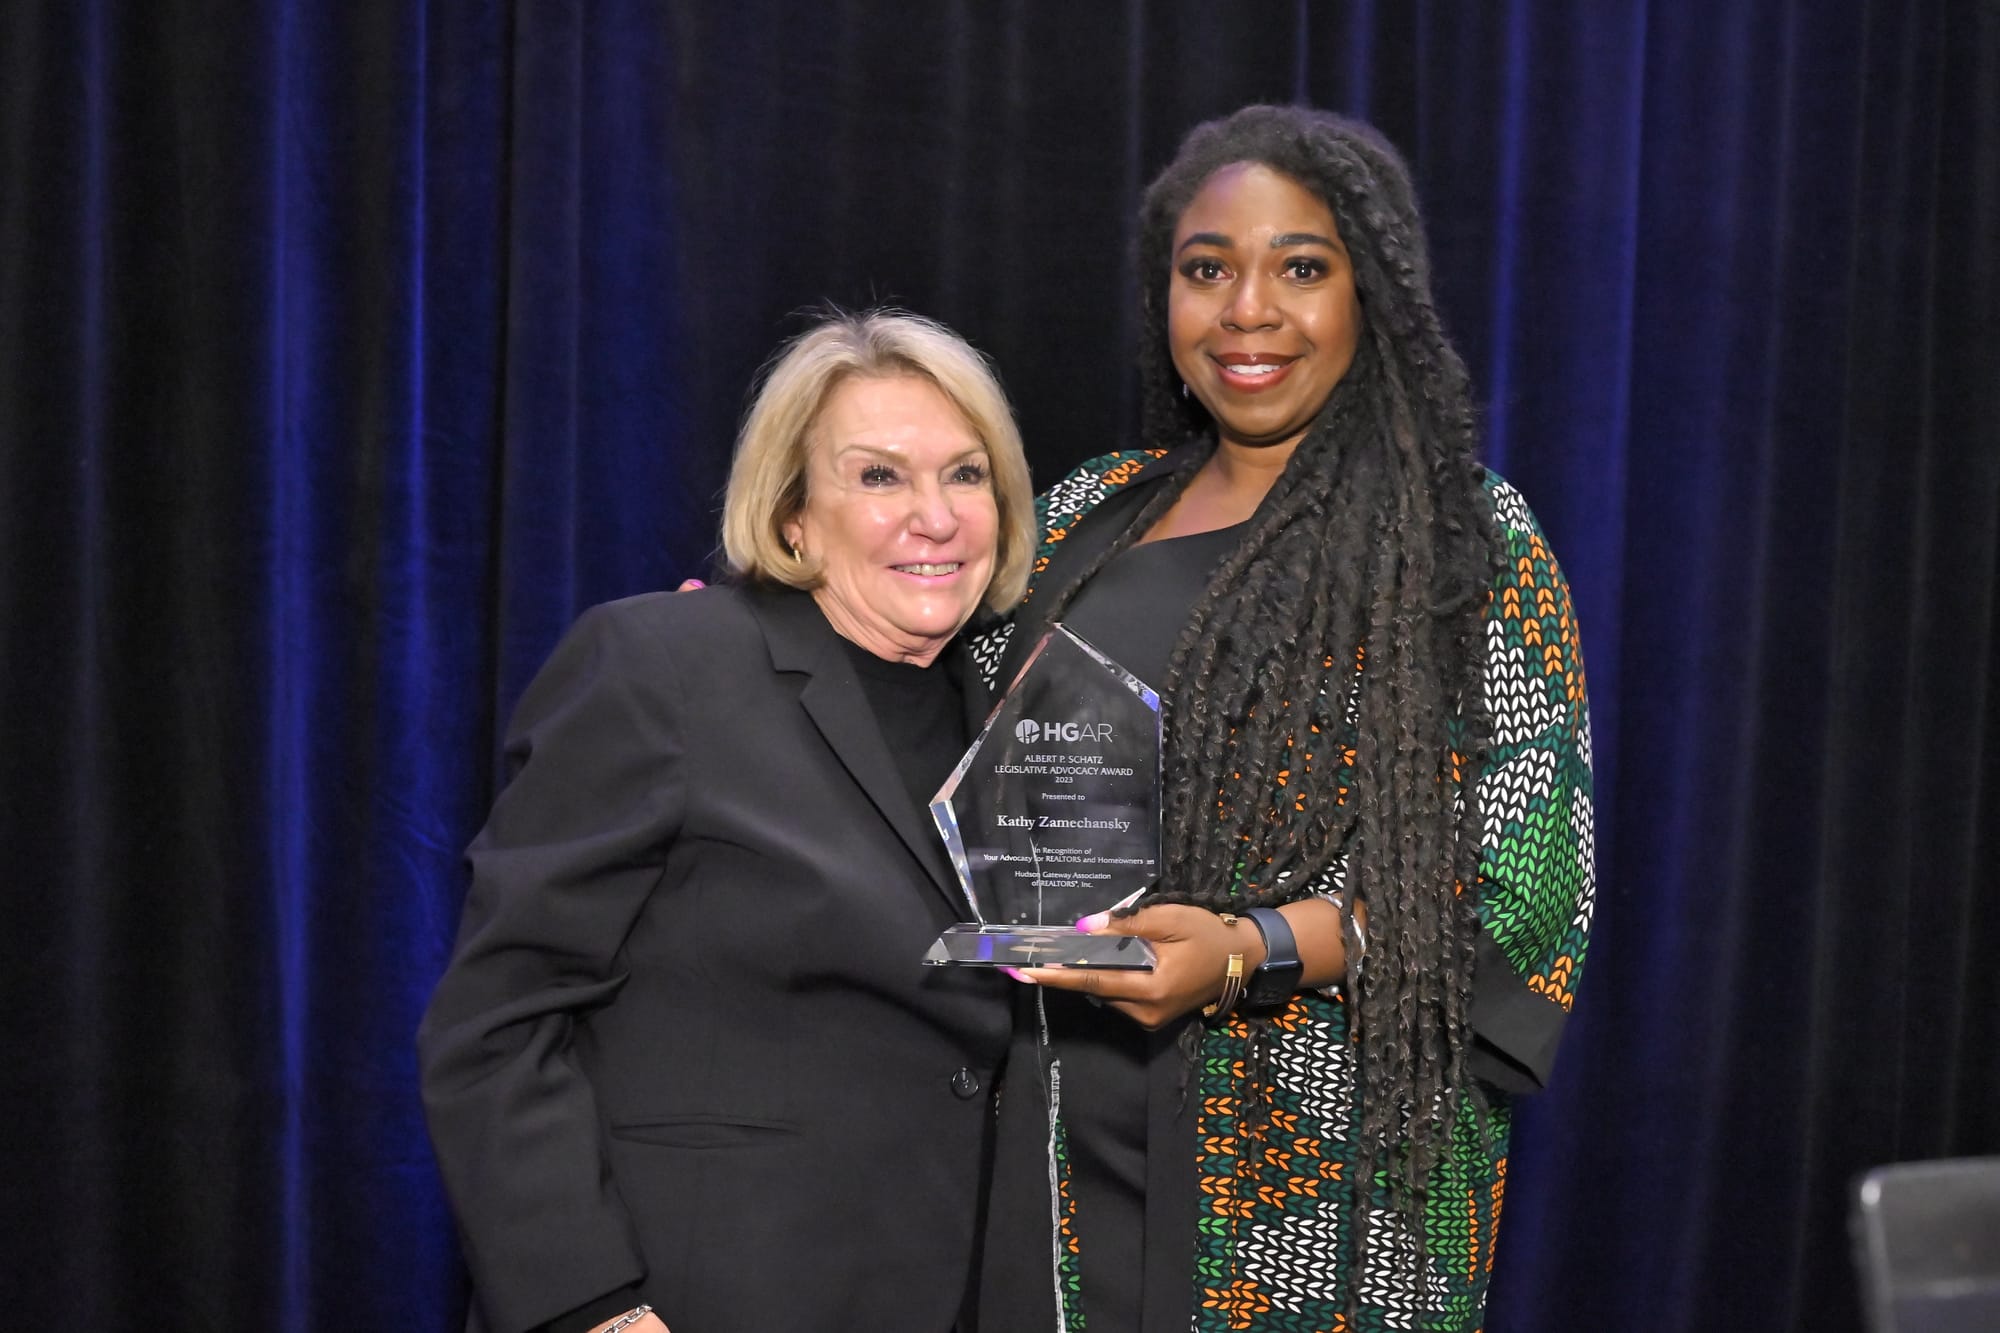 Kathy Zamachansky, left, who was honored with the “Albert P. Schatz Legislative Advocacy Award” and Crystal Hawkins-Syska, HGAR Recognition Committee Chair.